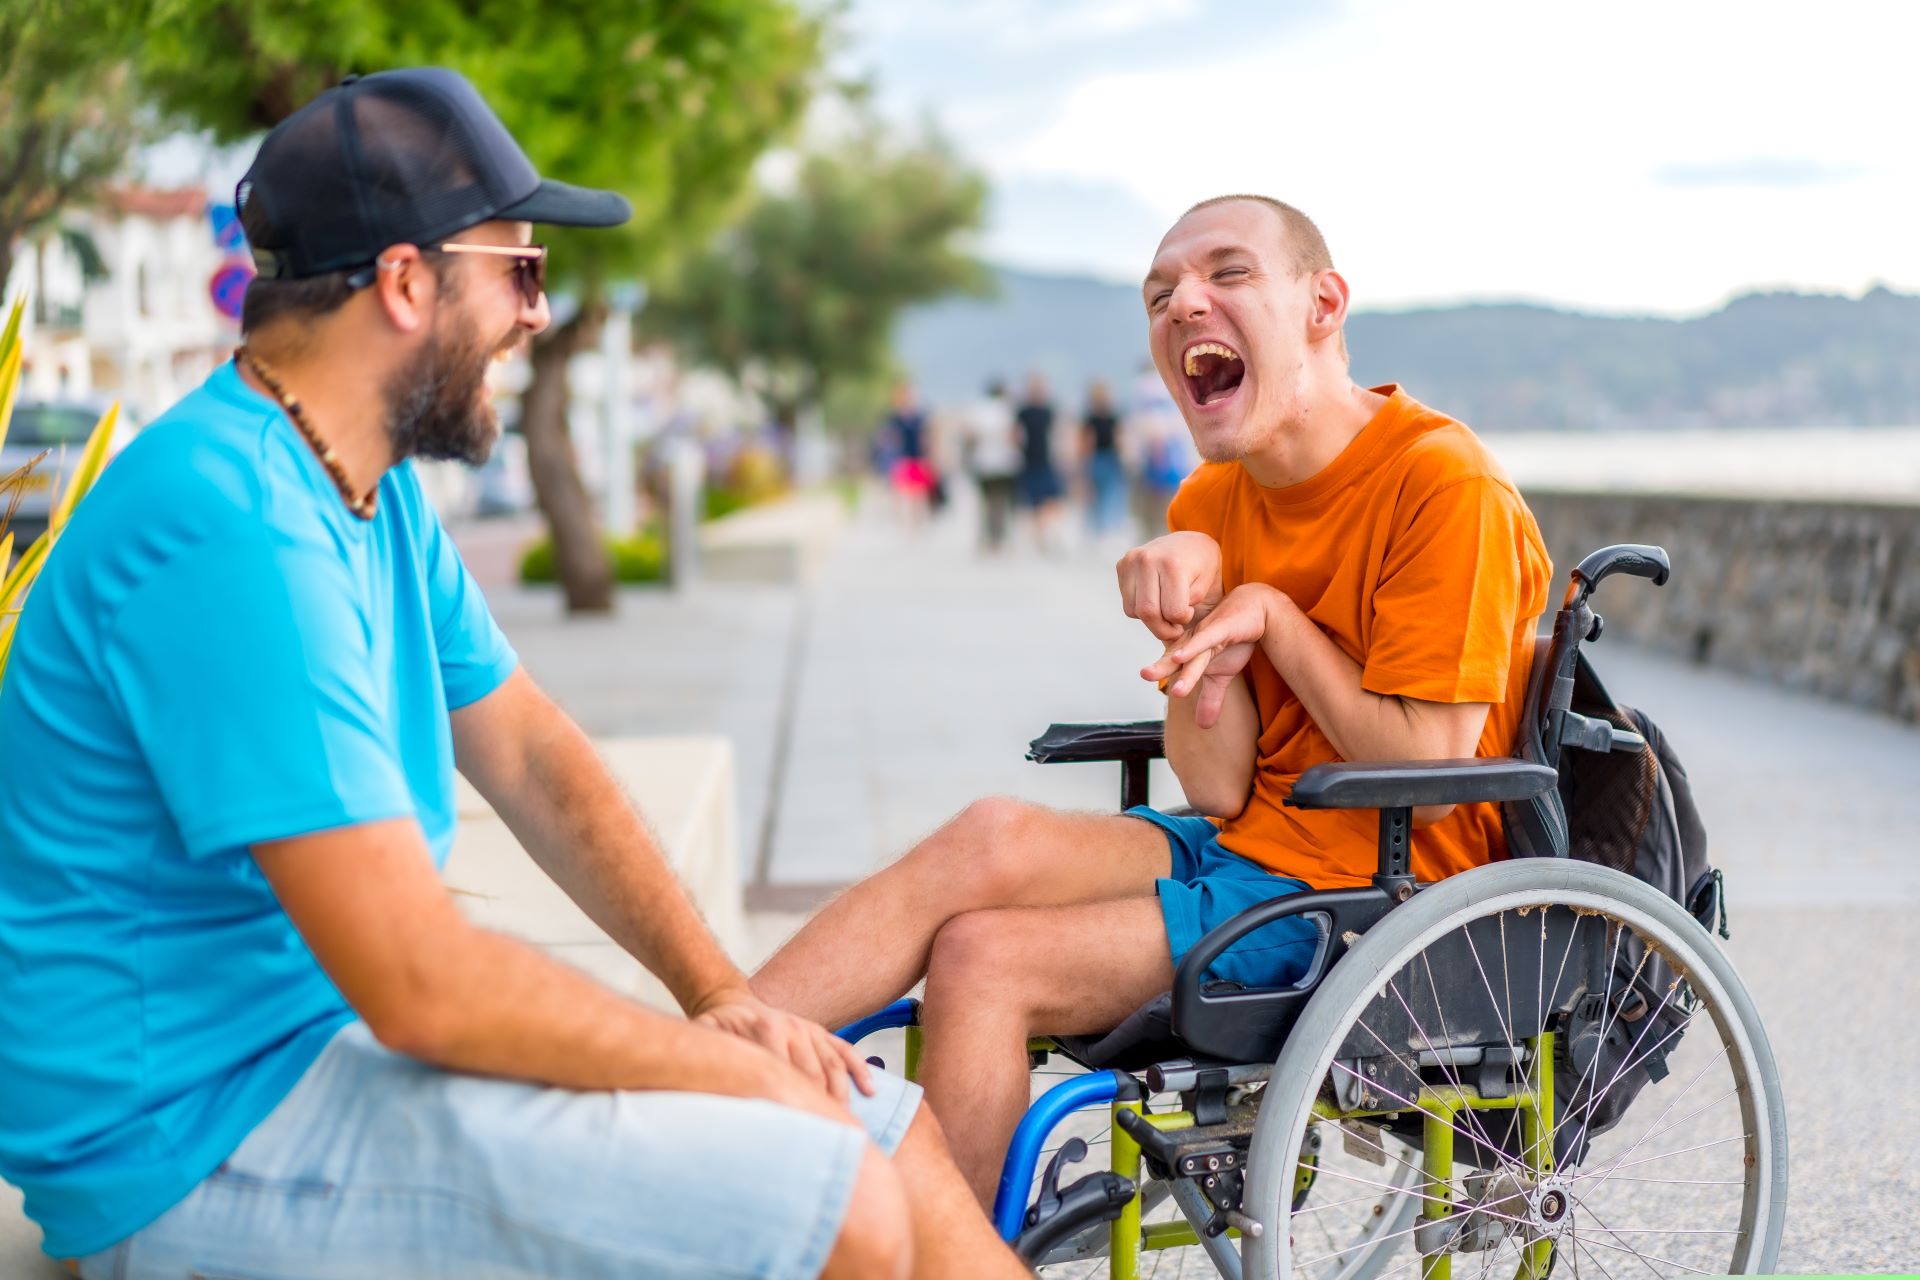 A person with disabilities and their support professional outside on a boardwalk